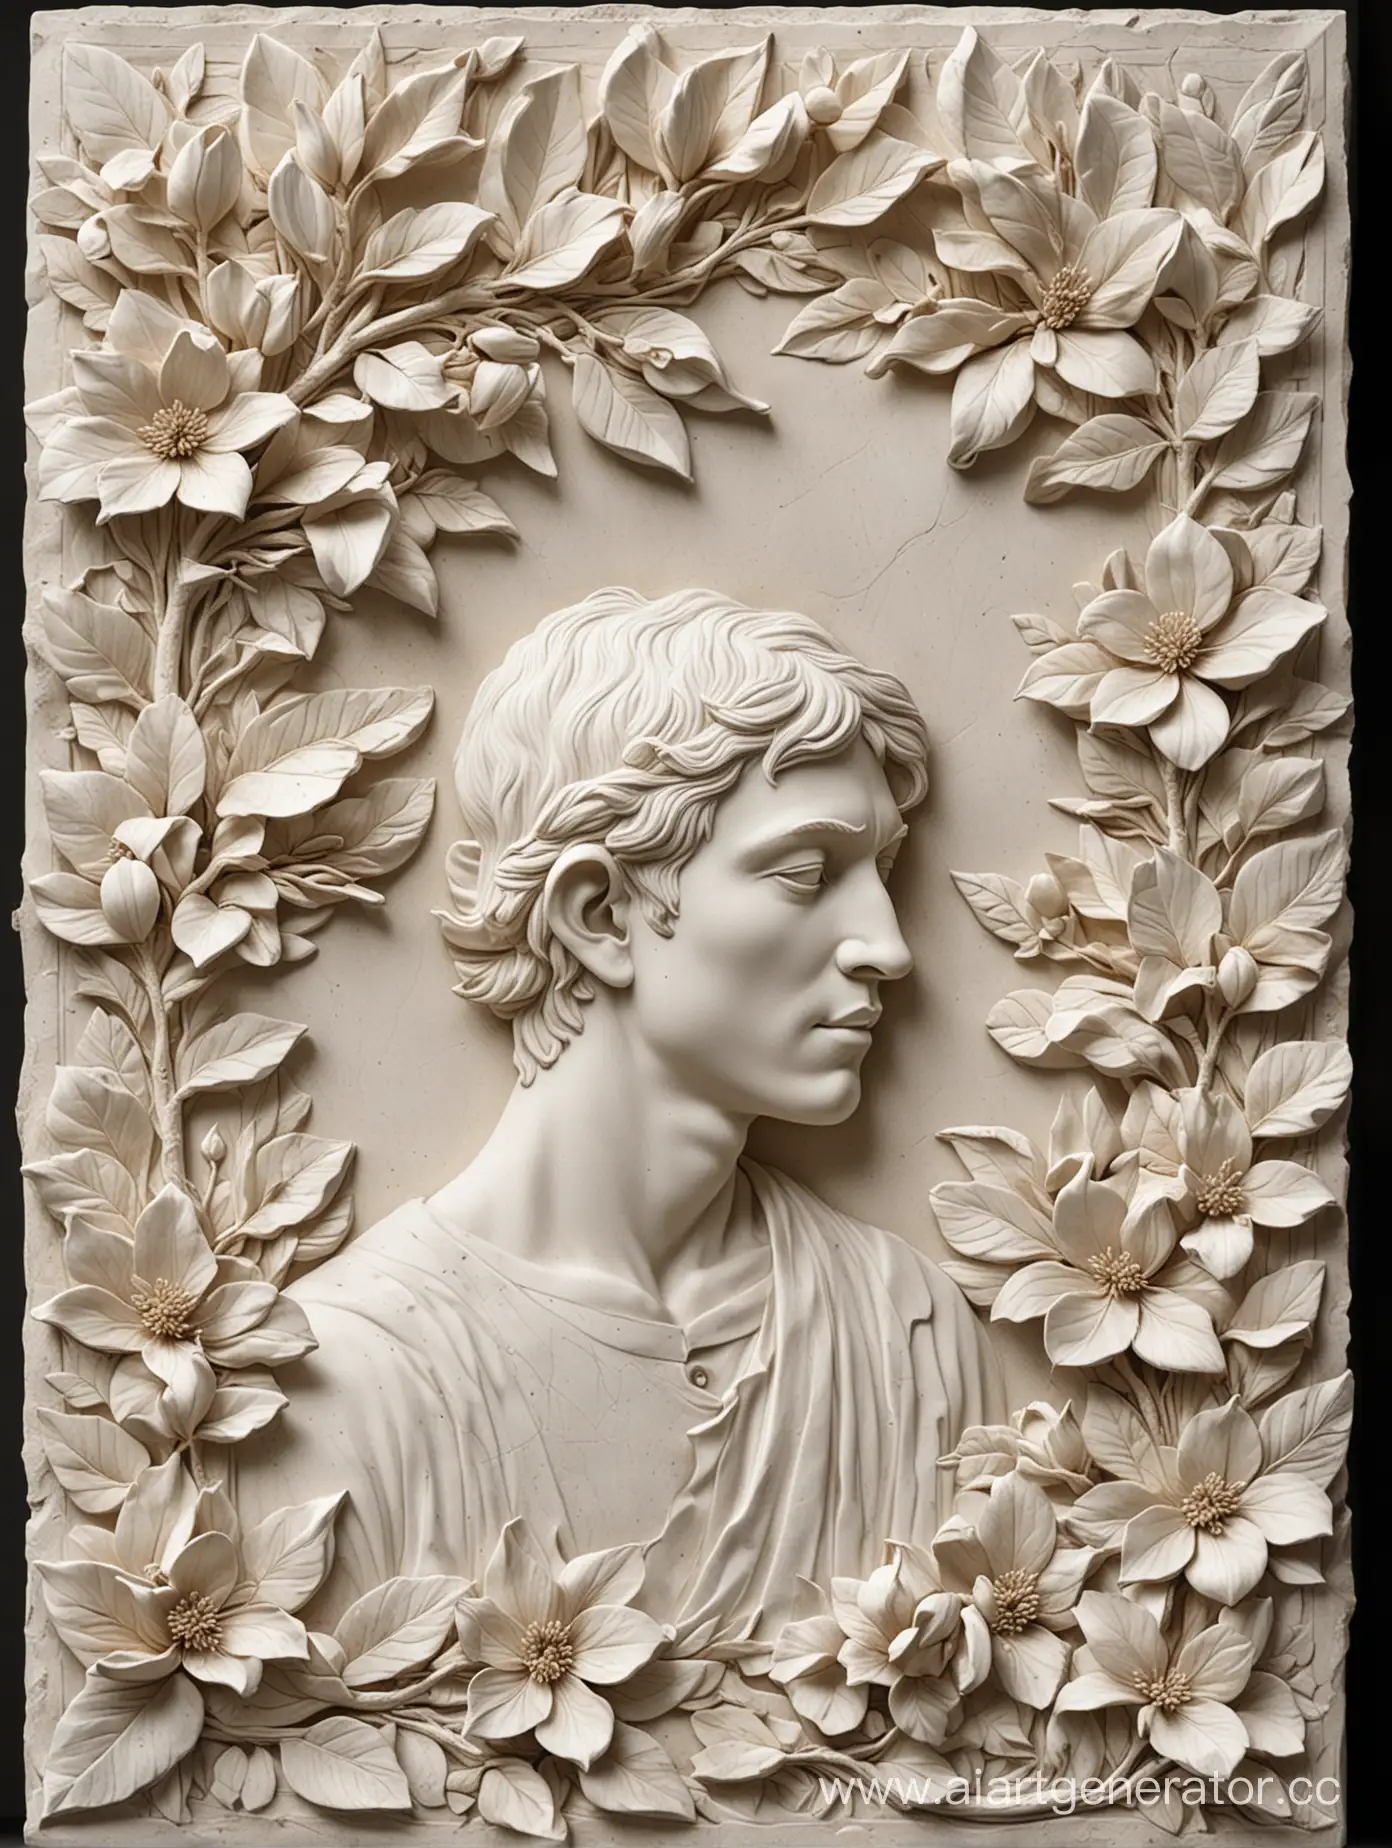 Stoned-Magnolia-Flowers-BasRelief-with-Young-Man